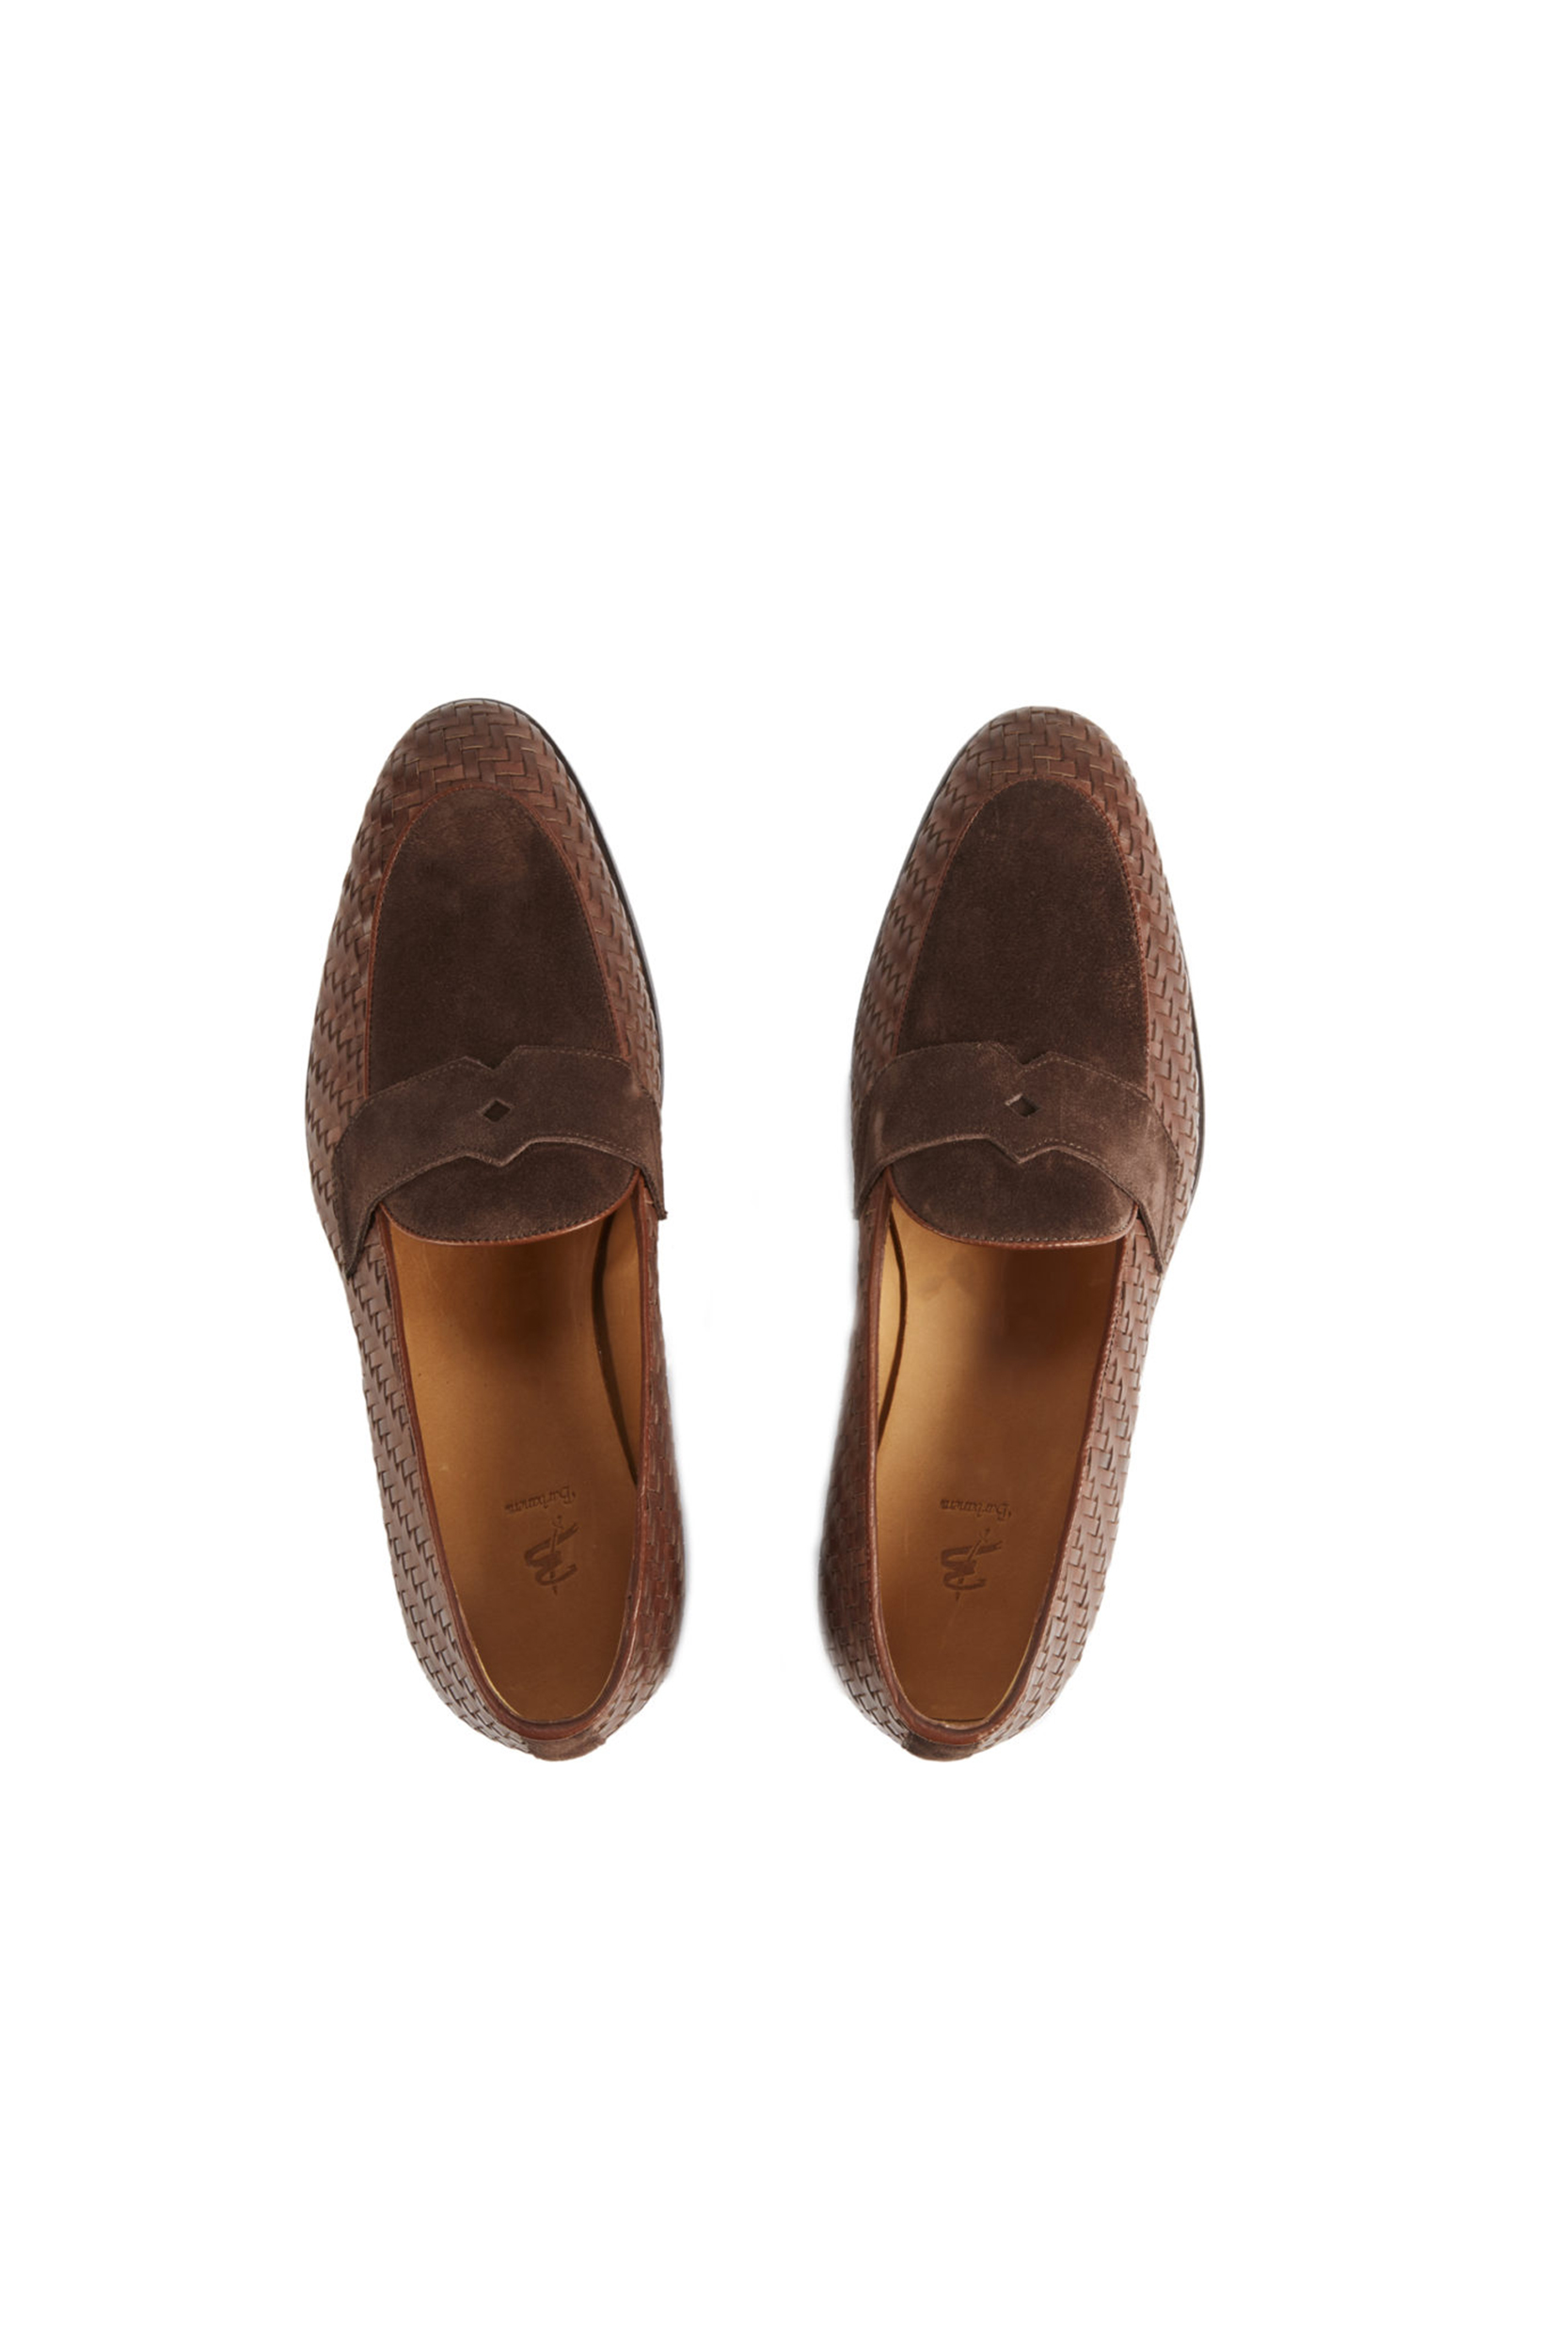 Schifano Brown Woven Leather/Brown Suede Penny Loafers - Barbanera